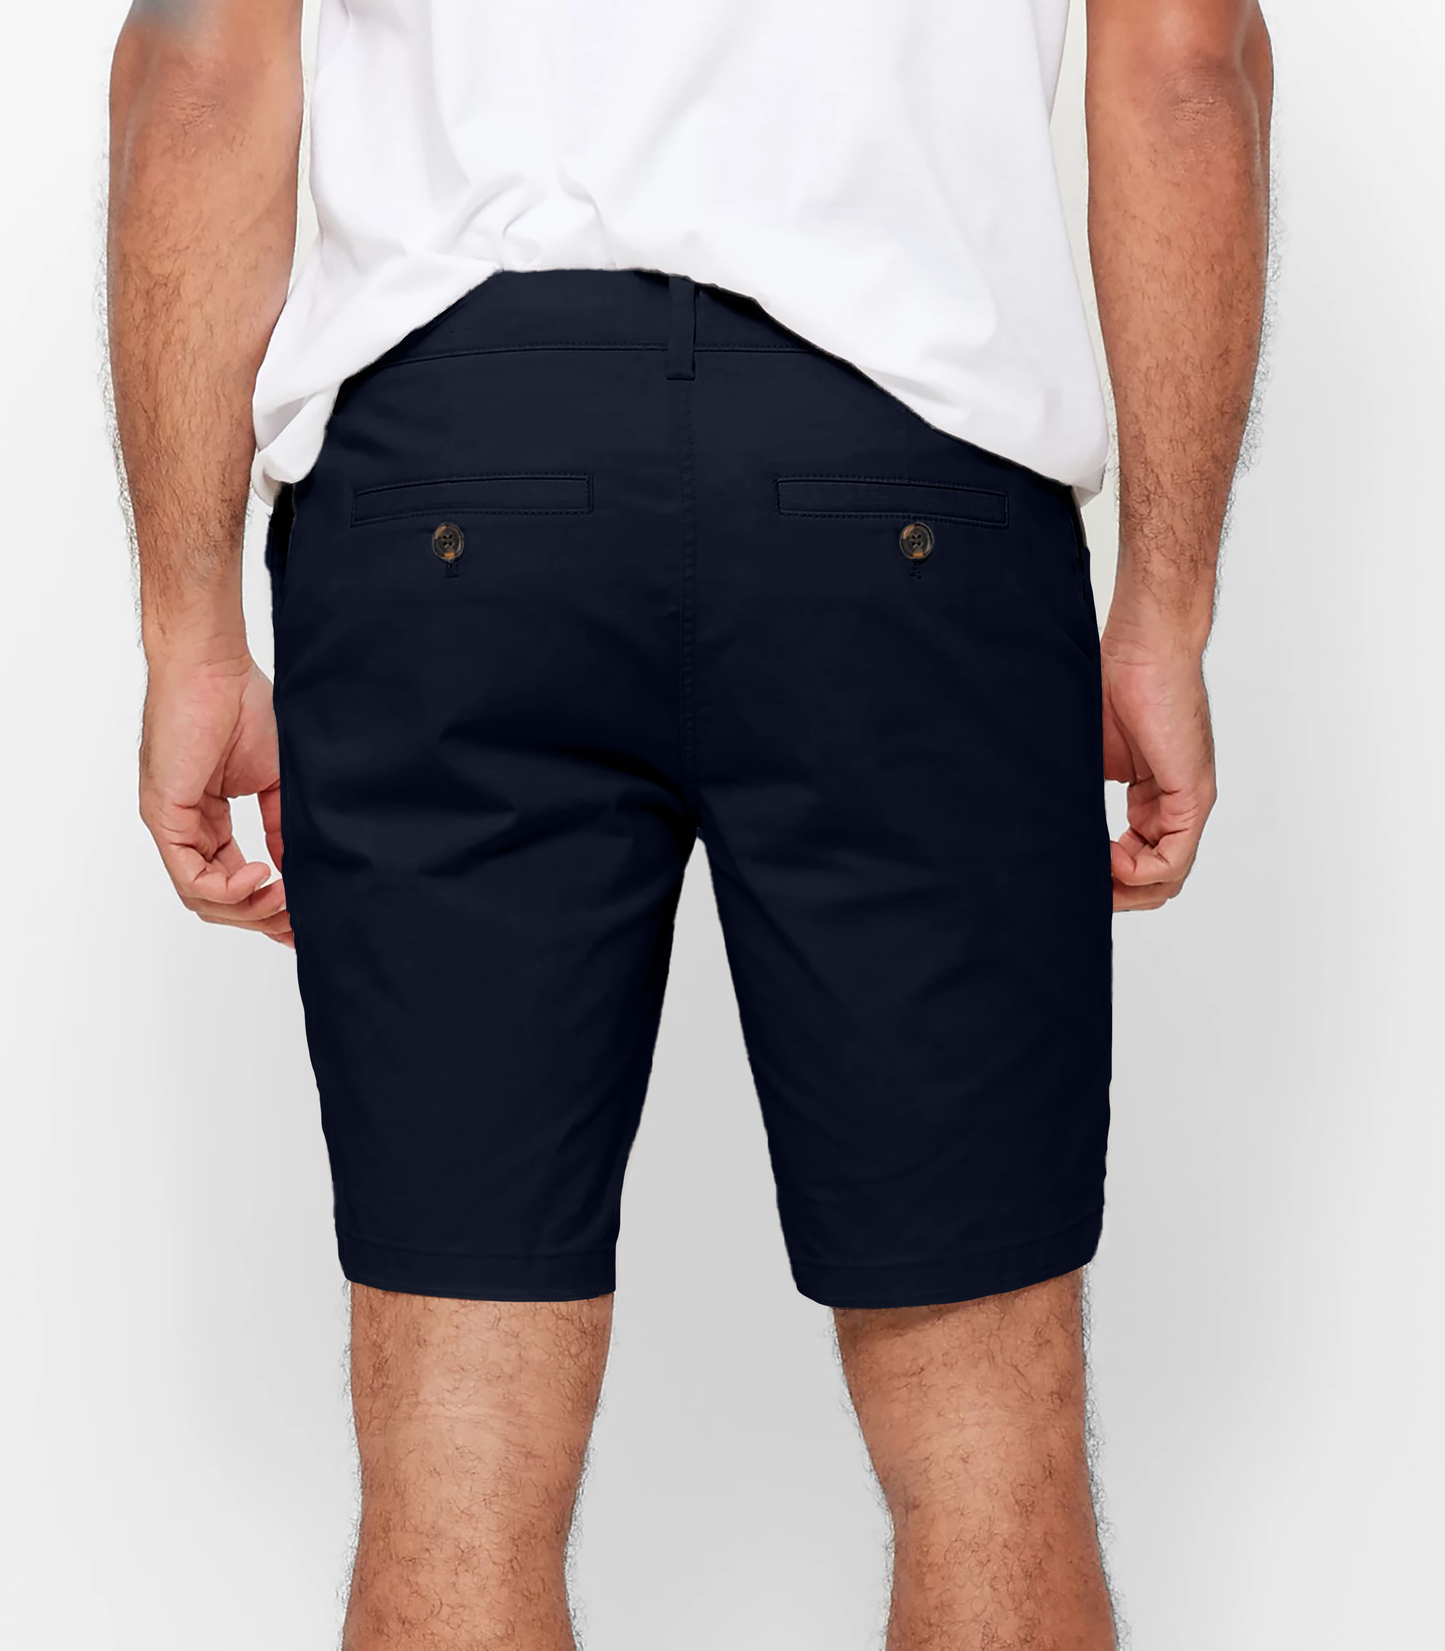 Mens Navy chinos shorts with front slanted pockets, jetted back pockets. zip fly fastening and brown horne buttons on the waistband and back pockets, the fit is a slim fit, this is worn with a white tee and white t-shirt